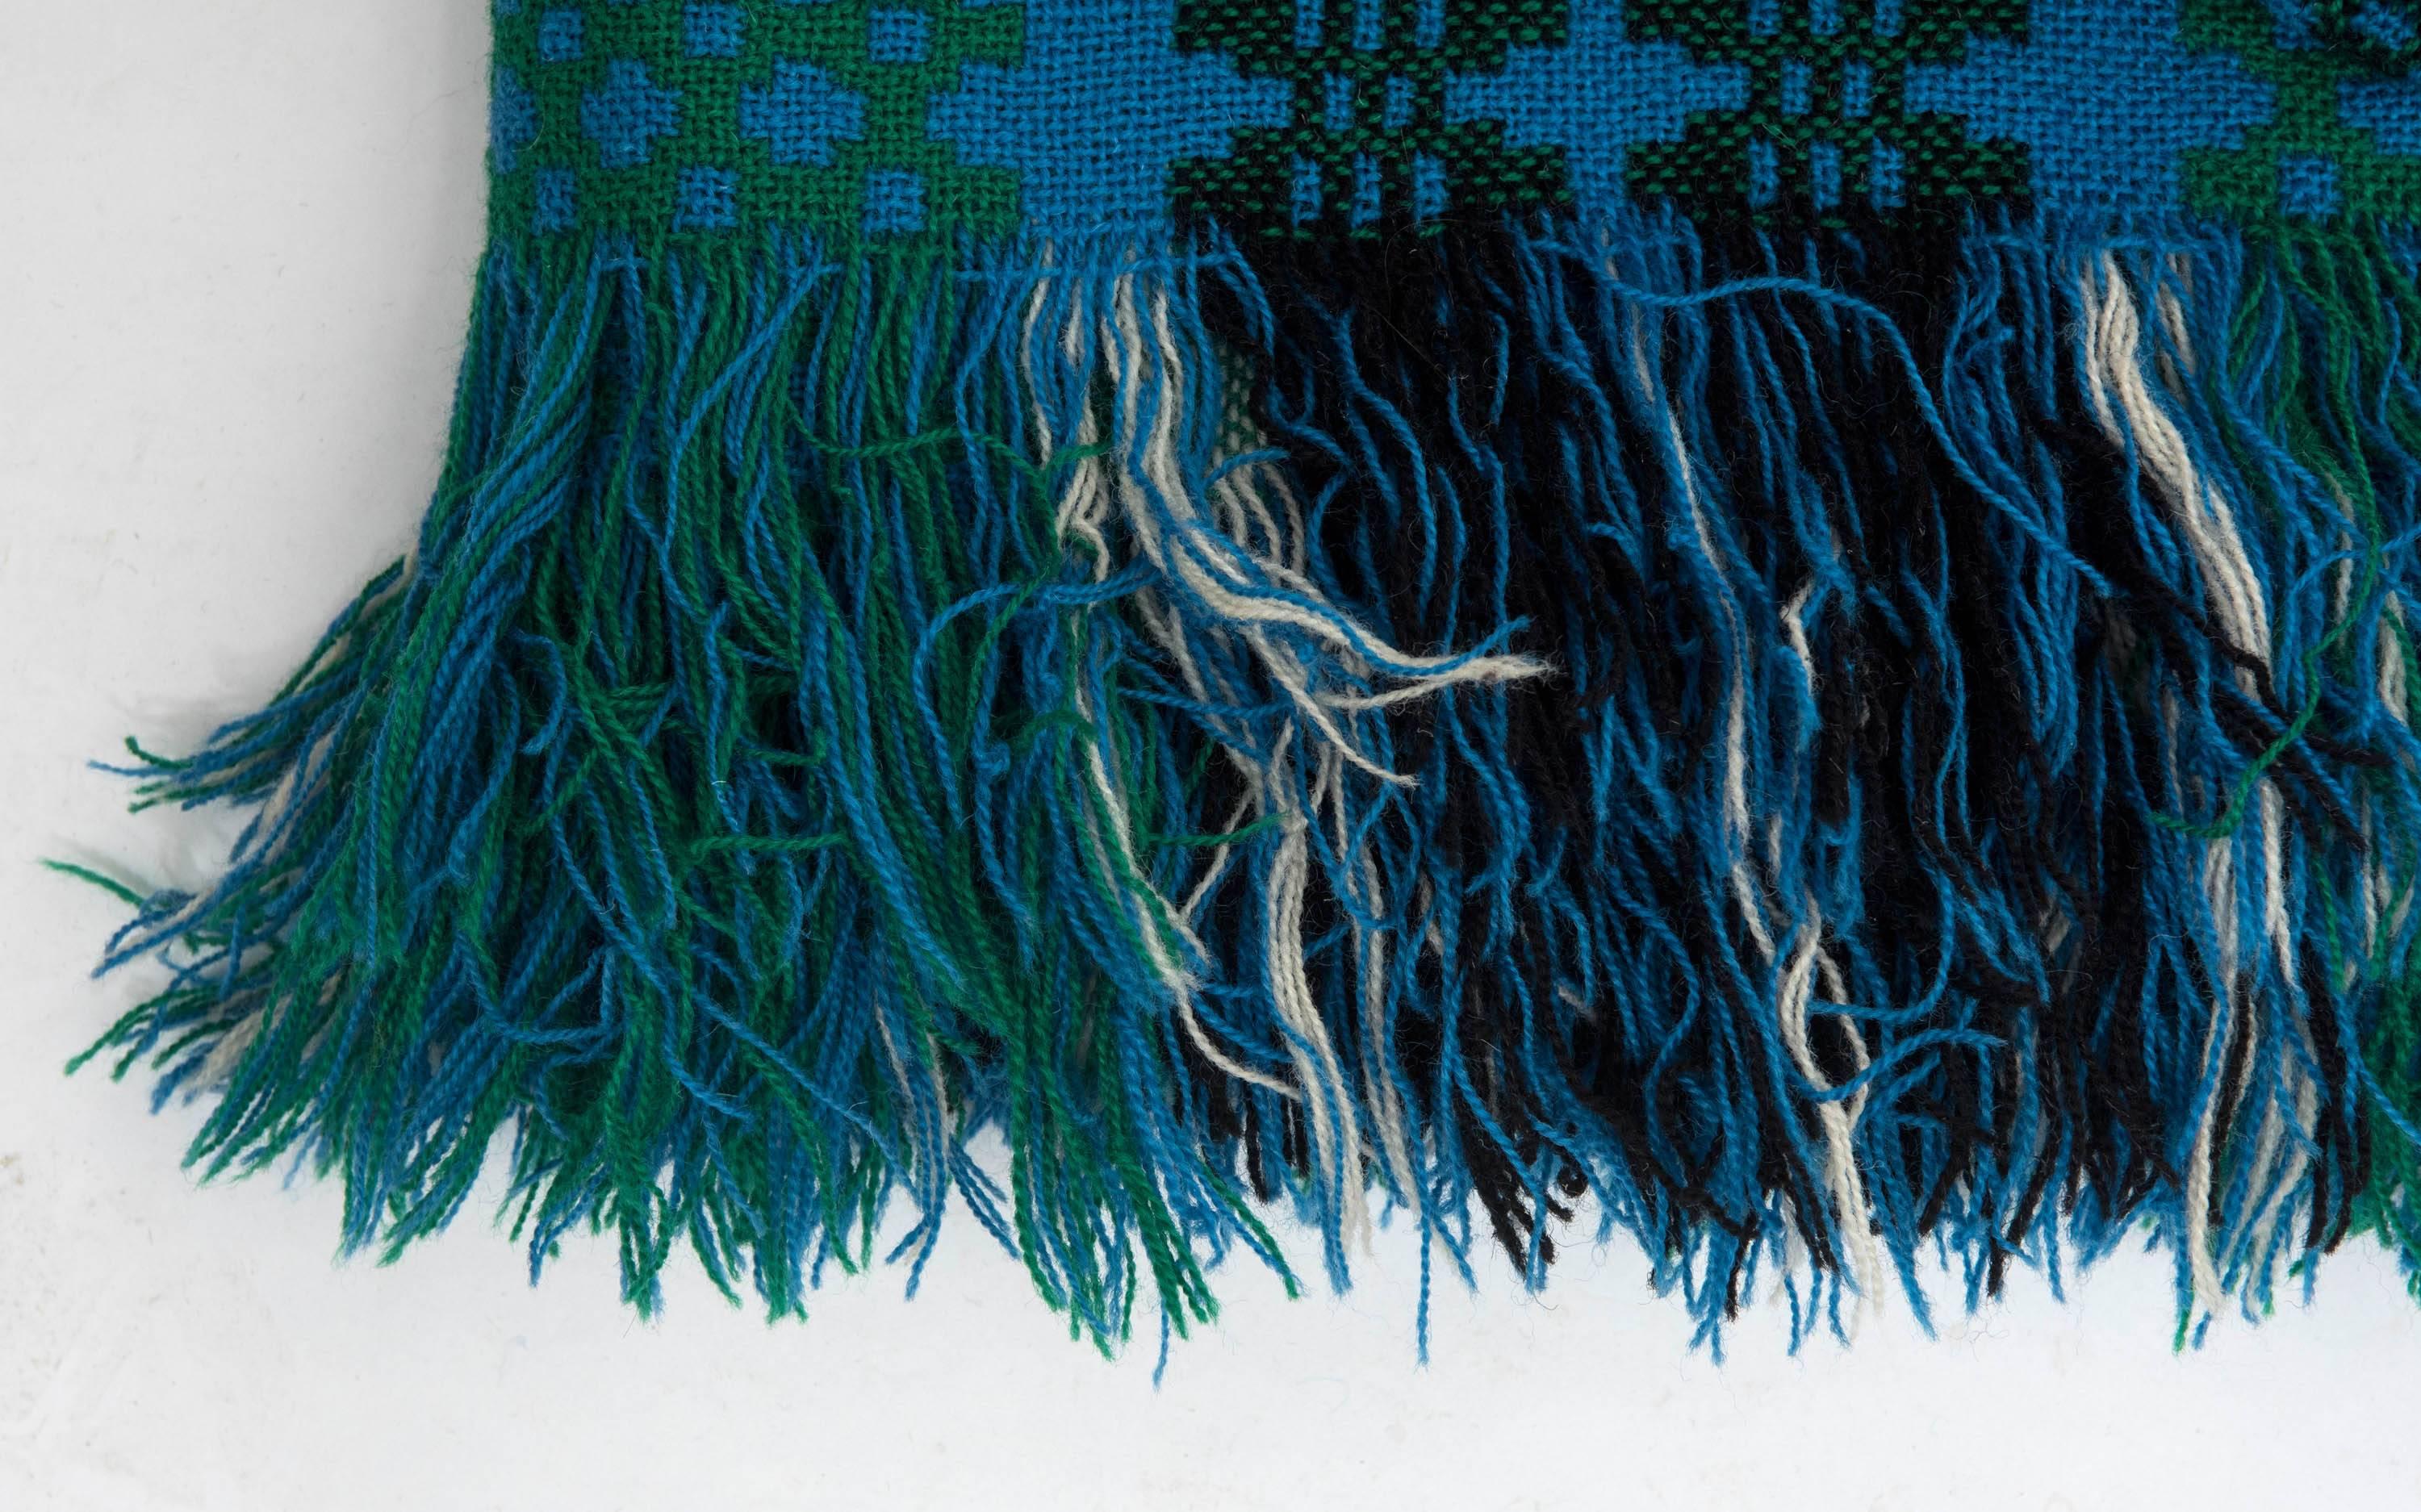 Hand-Woven Vintage Green and Blue Double Blanket from Trefriw Mill, Wales, circa 1970